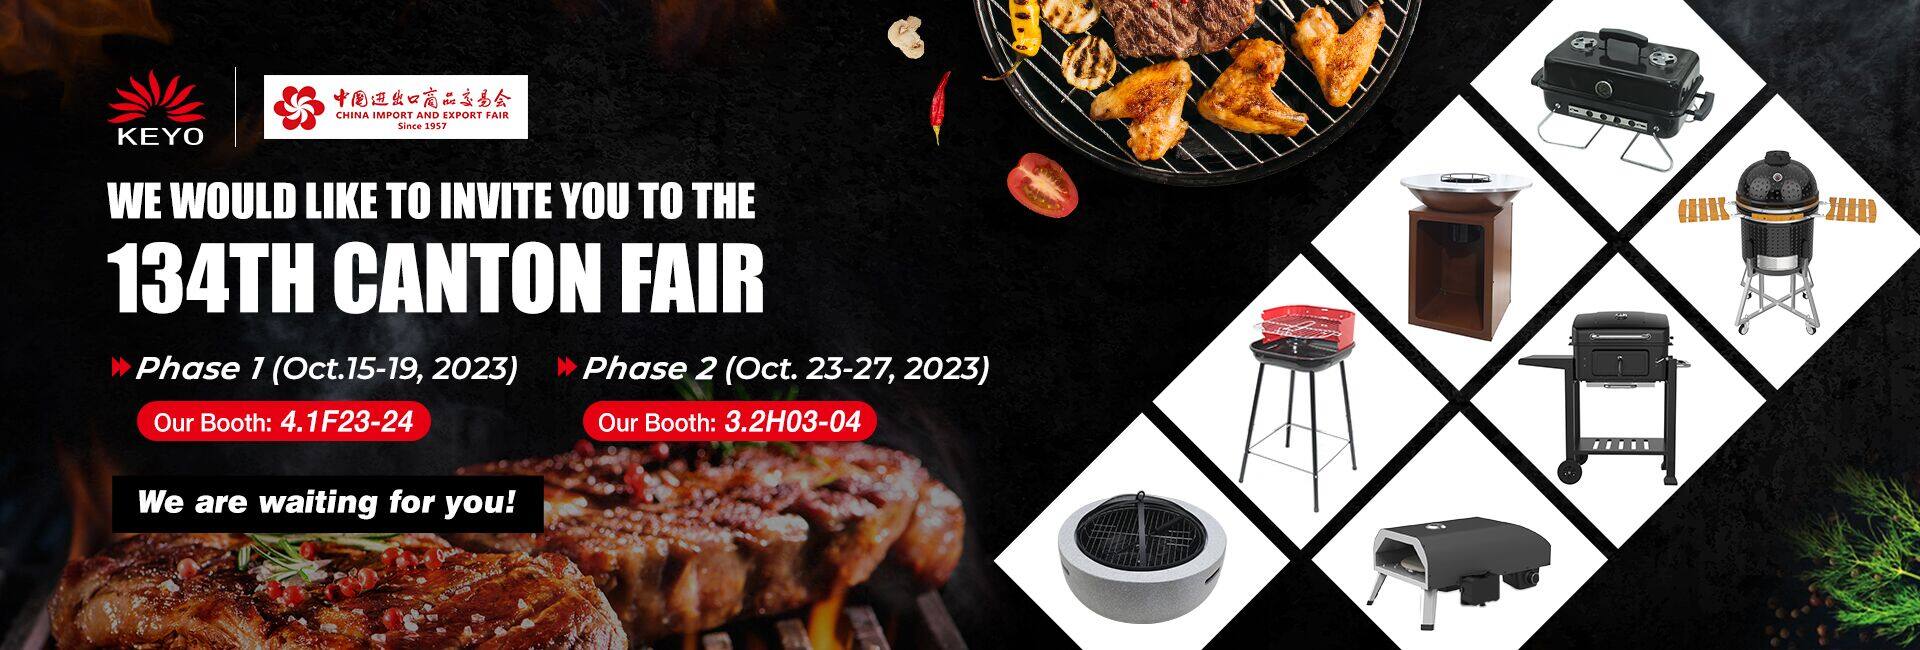 Welcome to visit our booth at 134th Canton Fair!